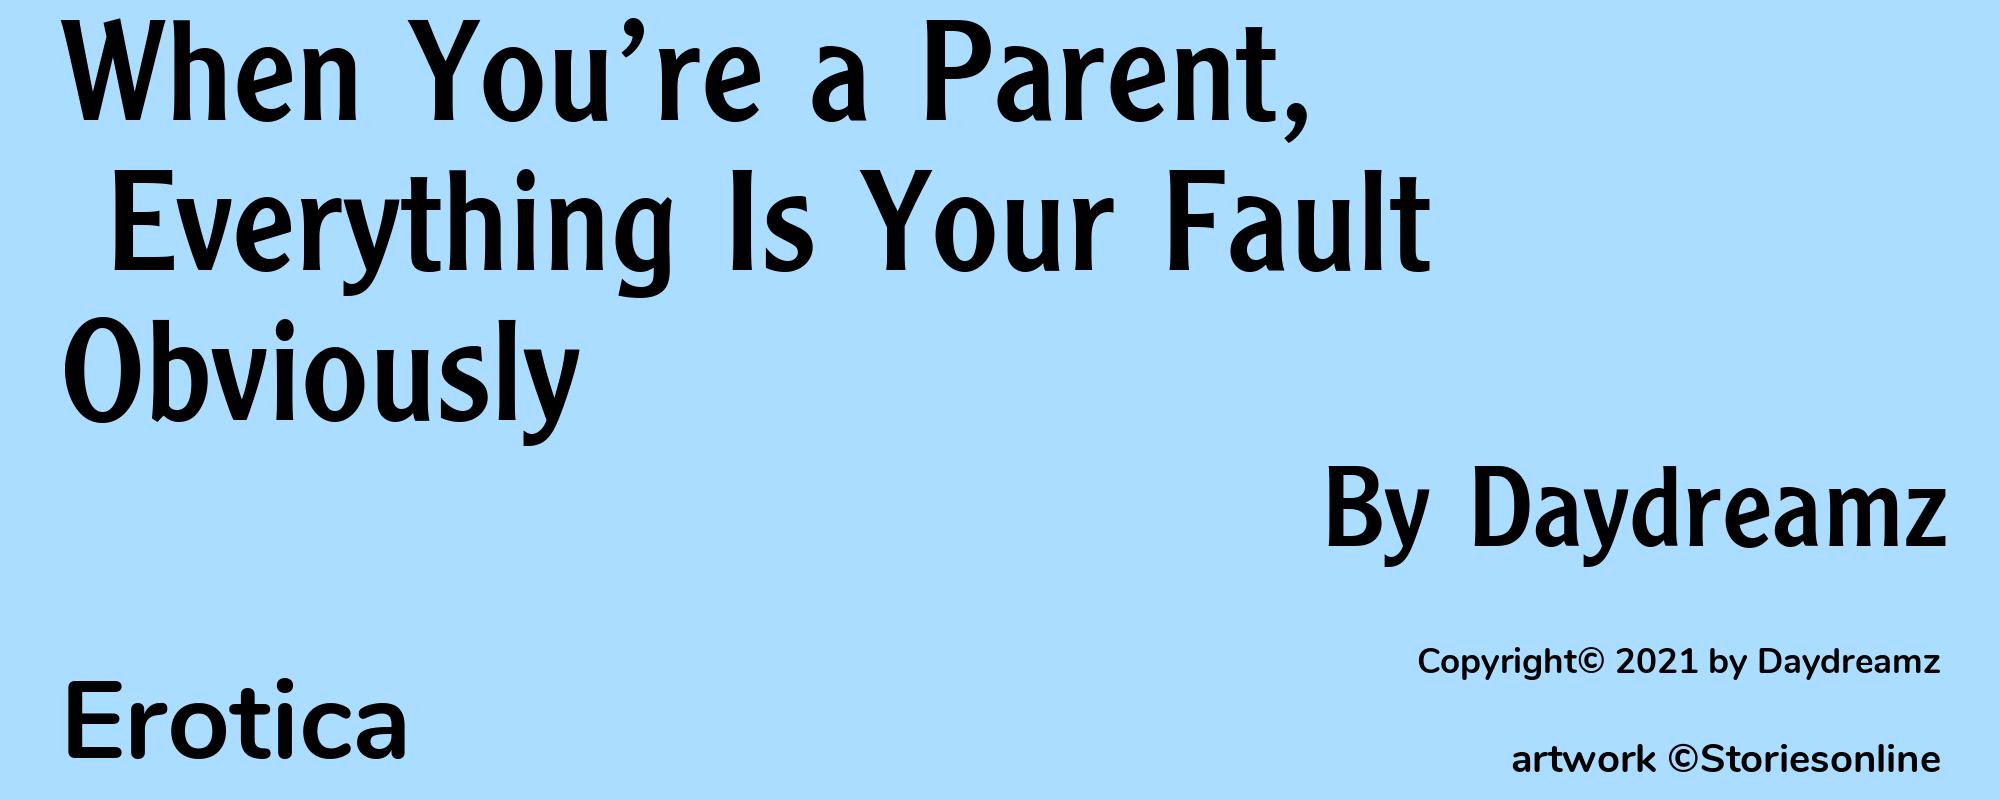 When You’re a Parent, Everything Is Your Fault Obviously - Cover